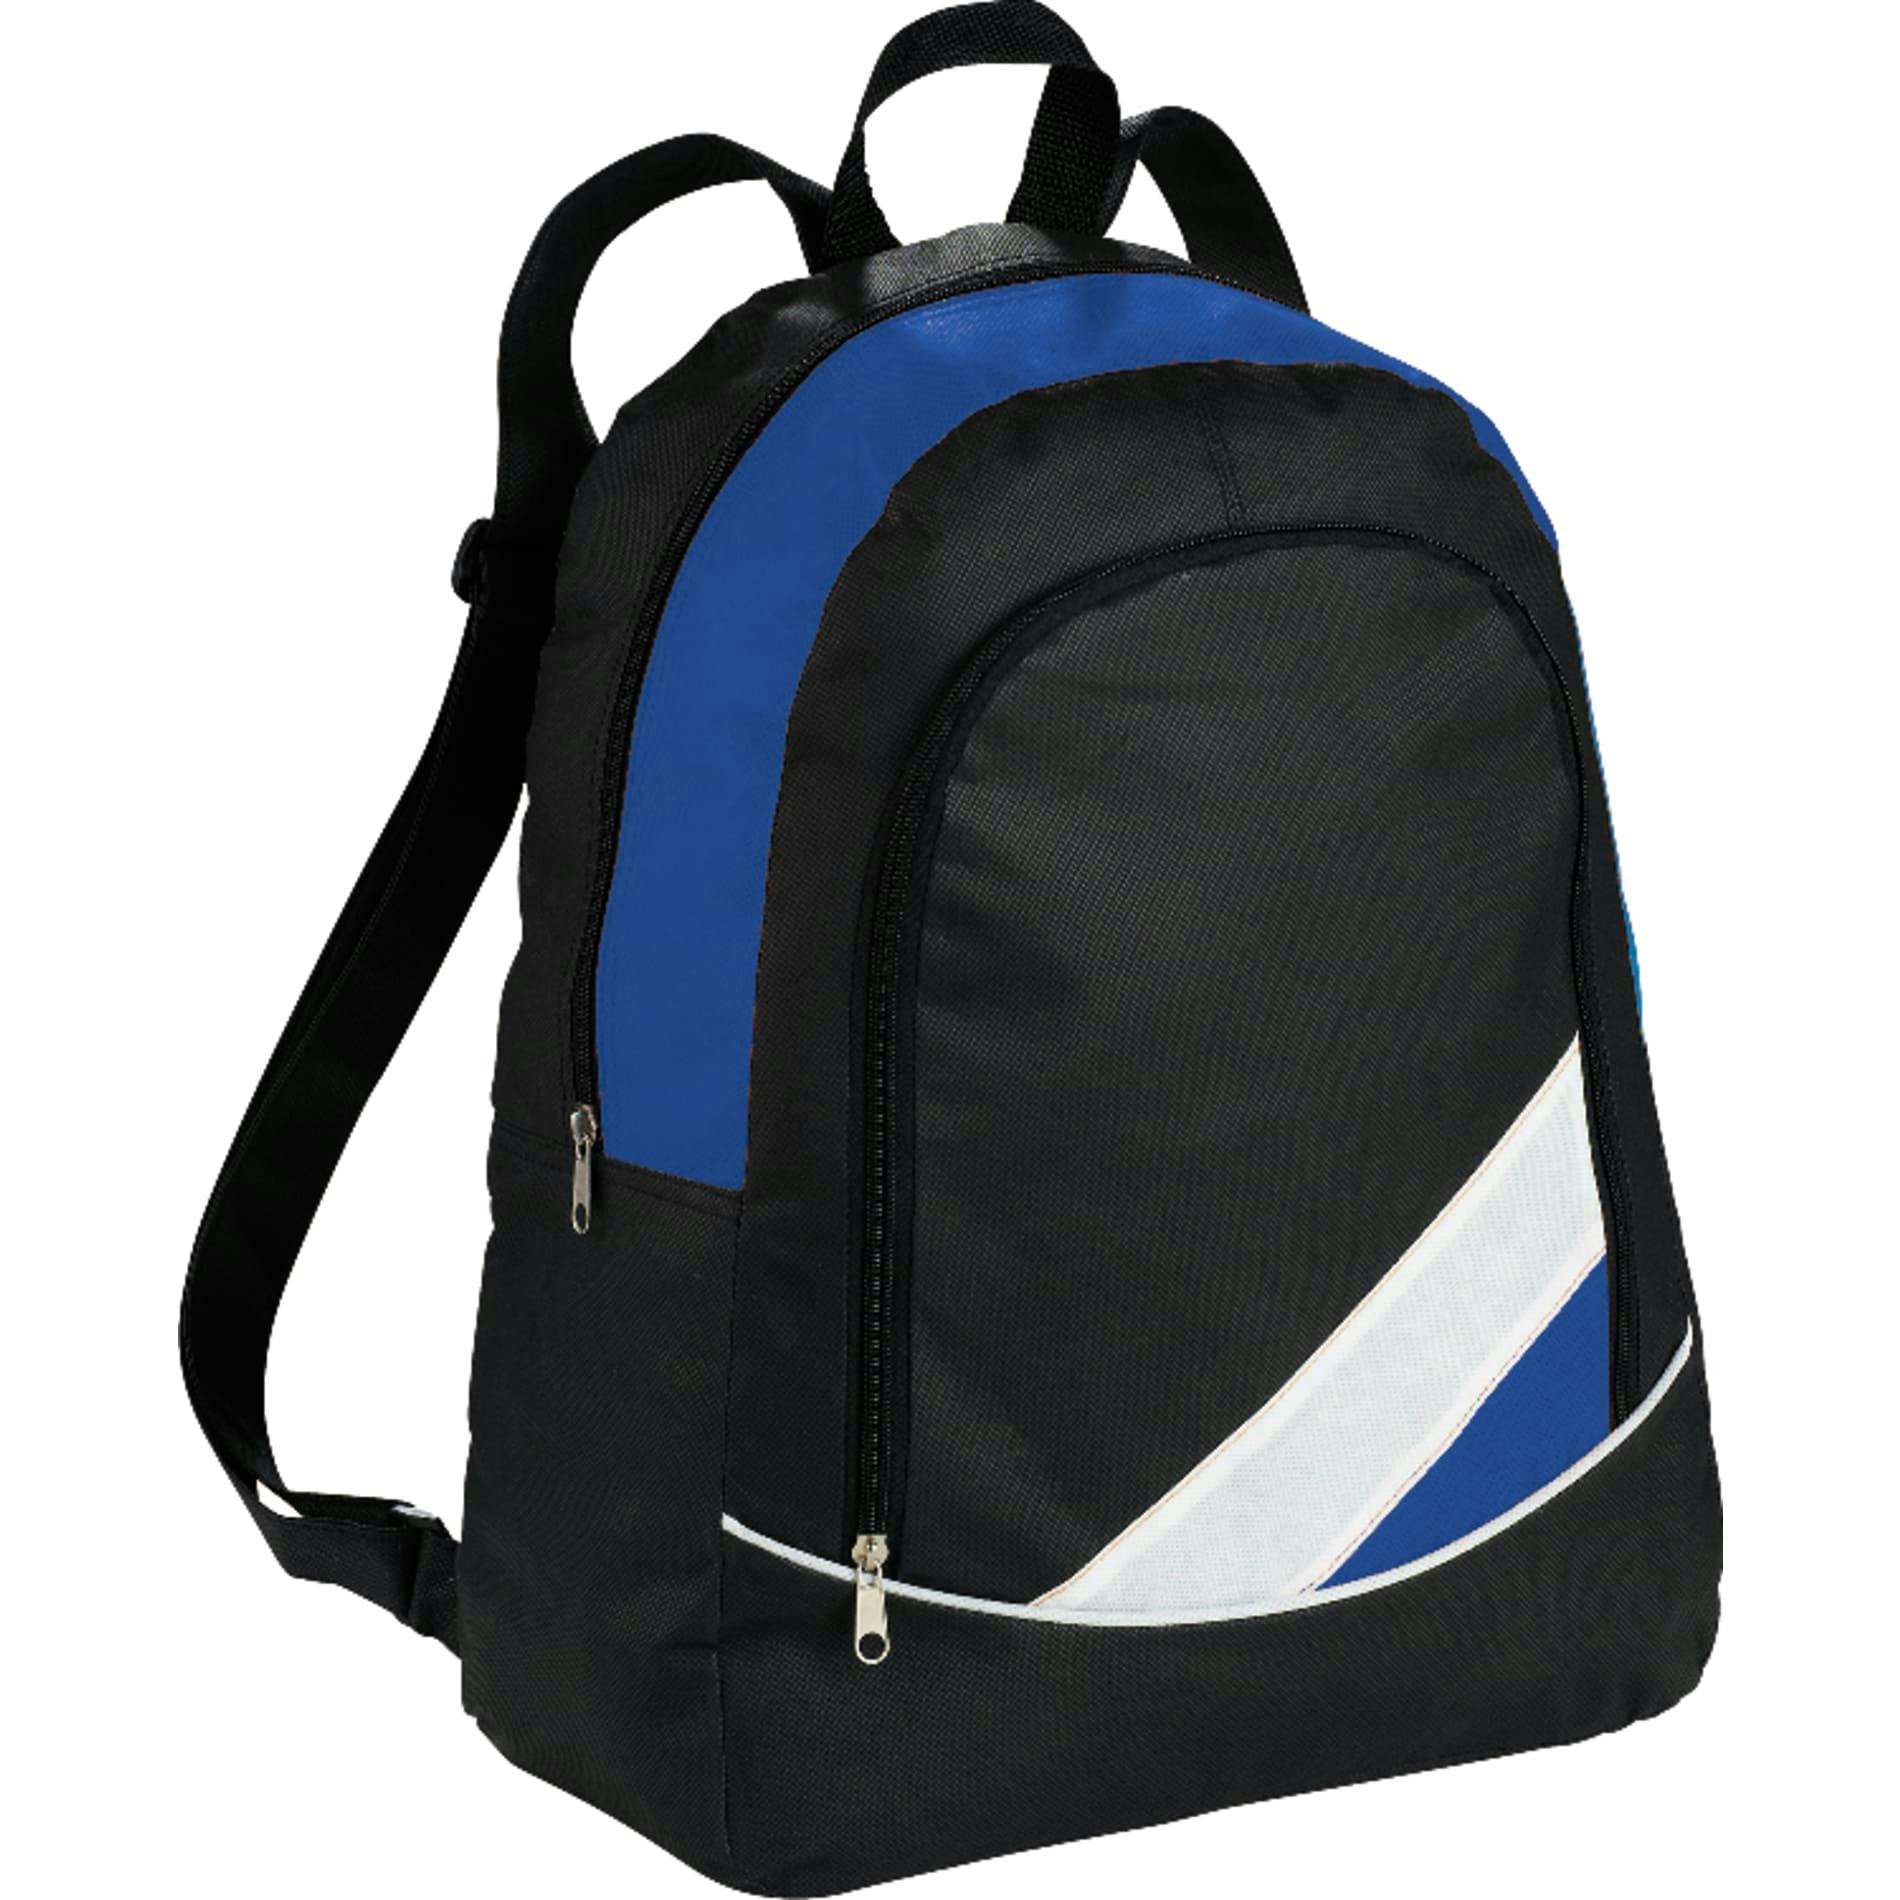 Thunderbolt Deluxe Backpack - additional Image 2